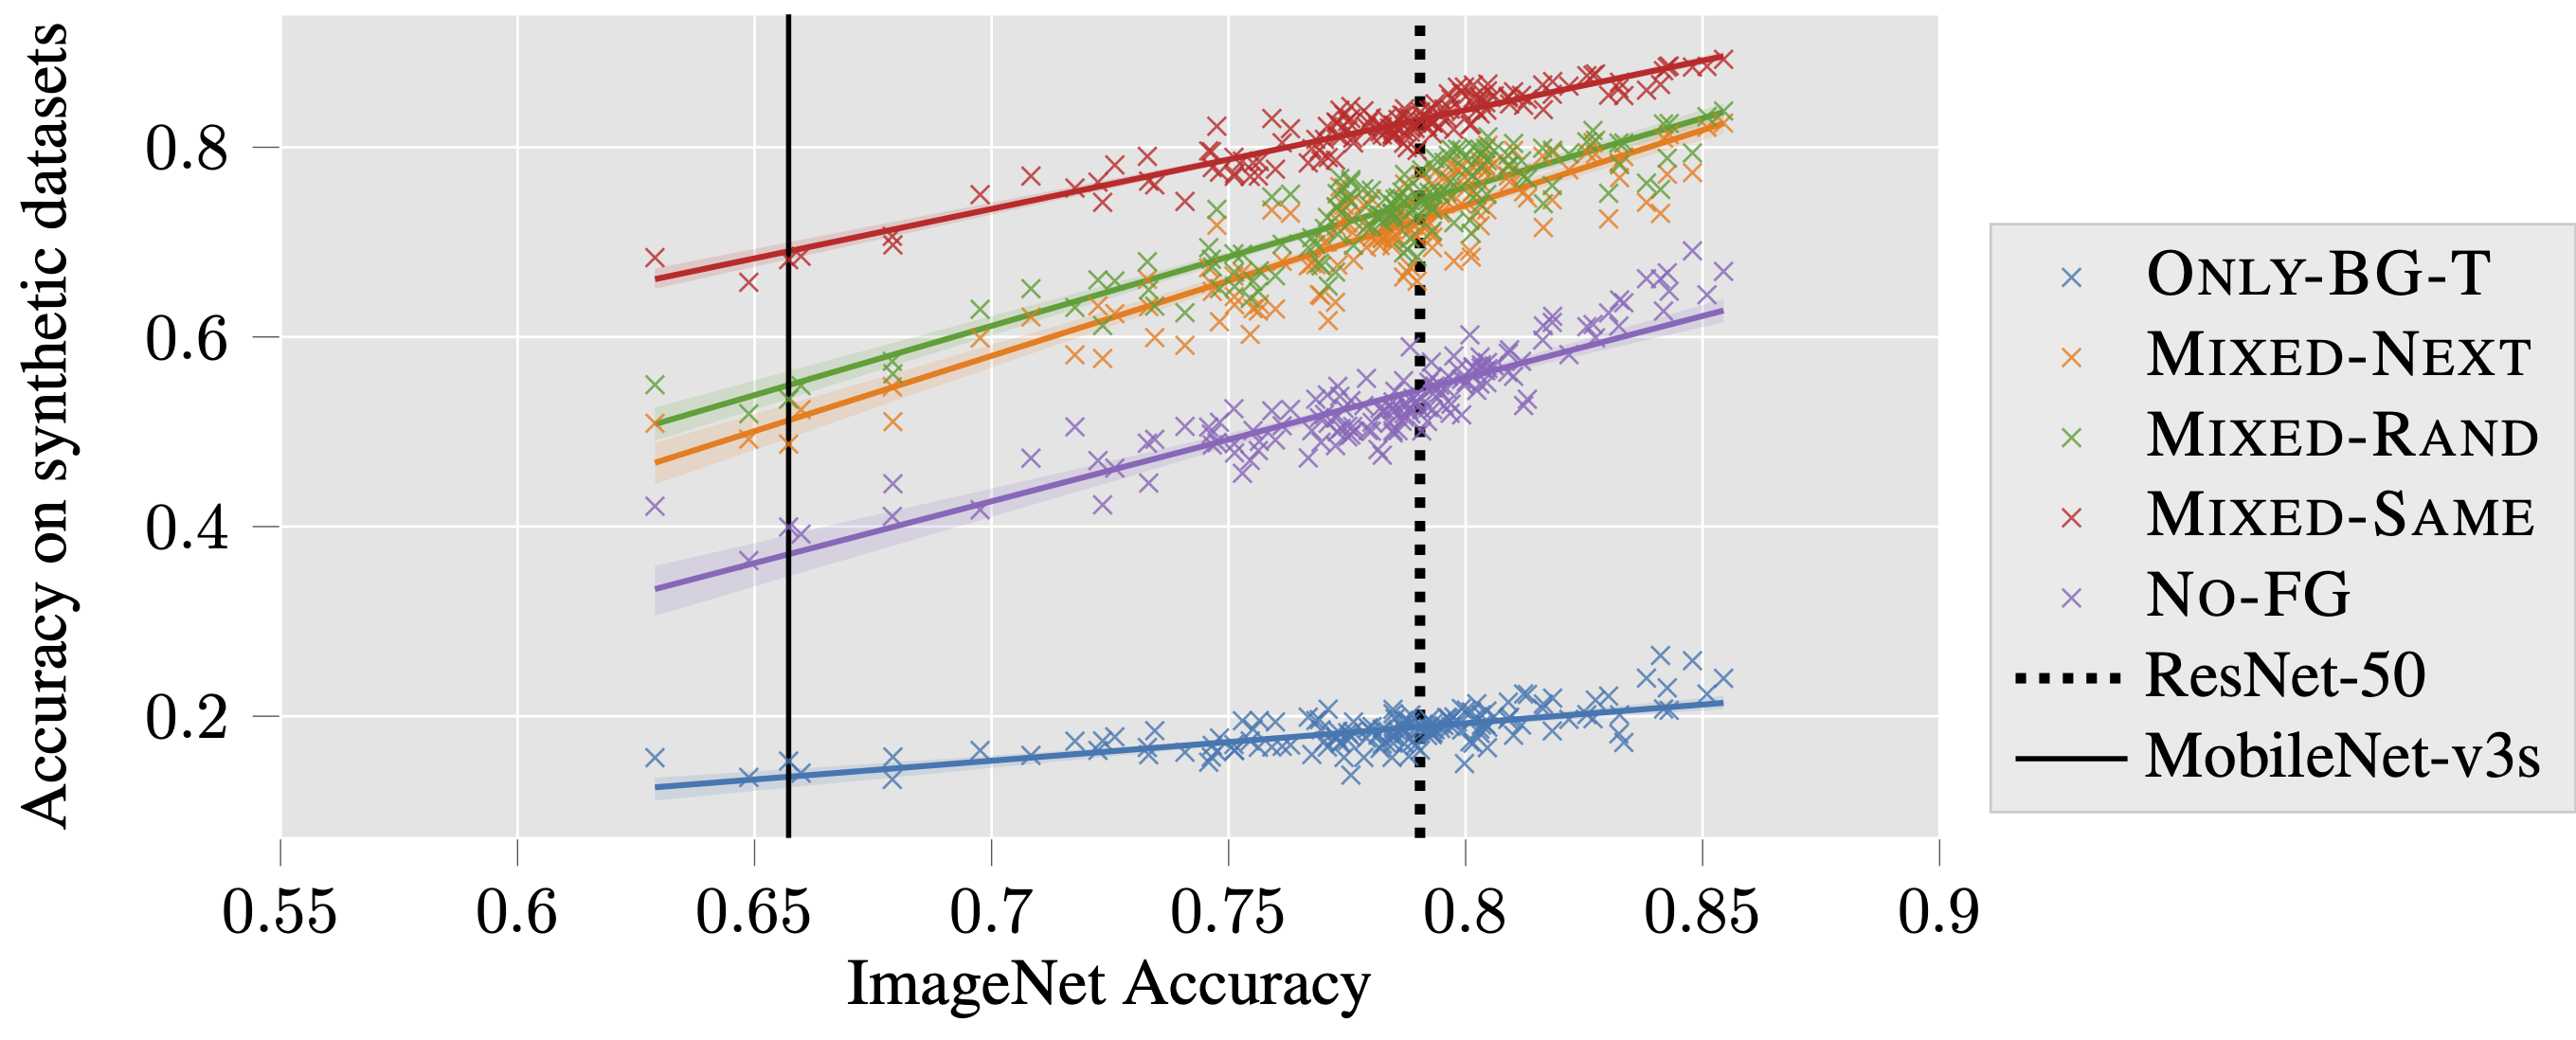 ImageNet accuracy plotted against accuracy on synthetic datasets